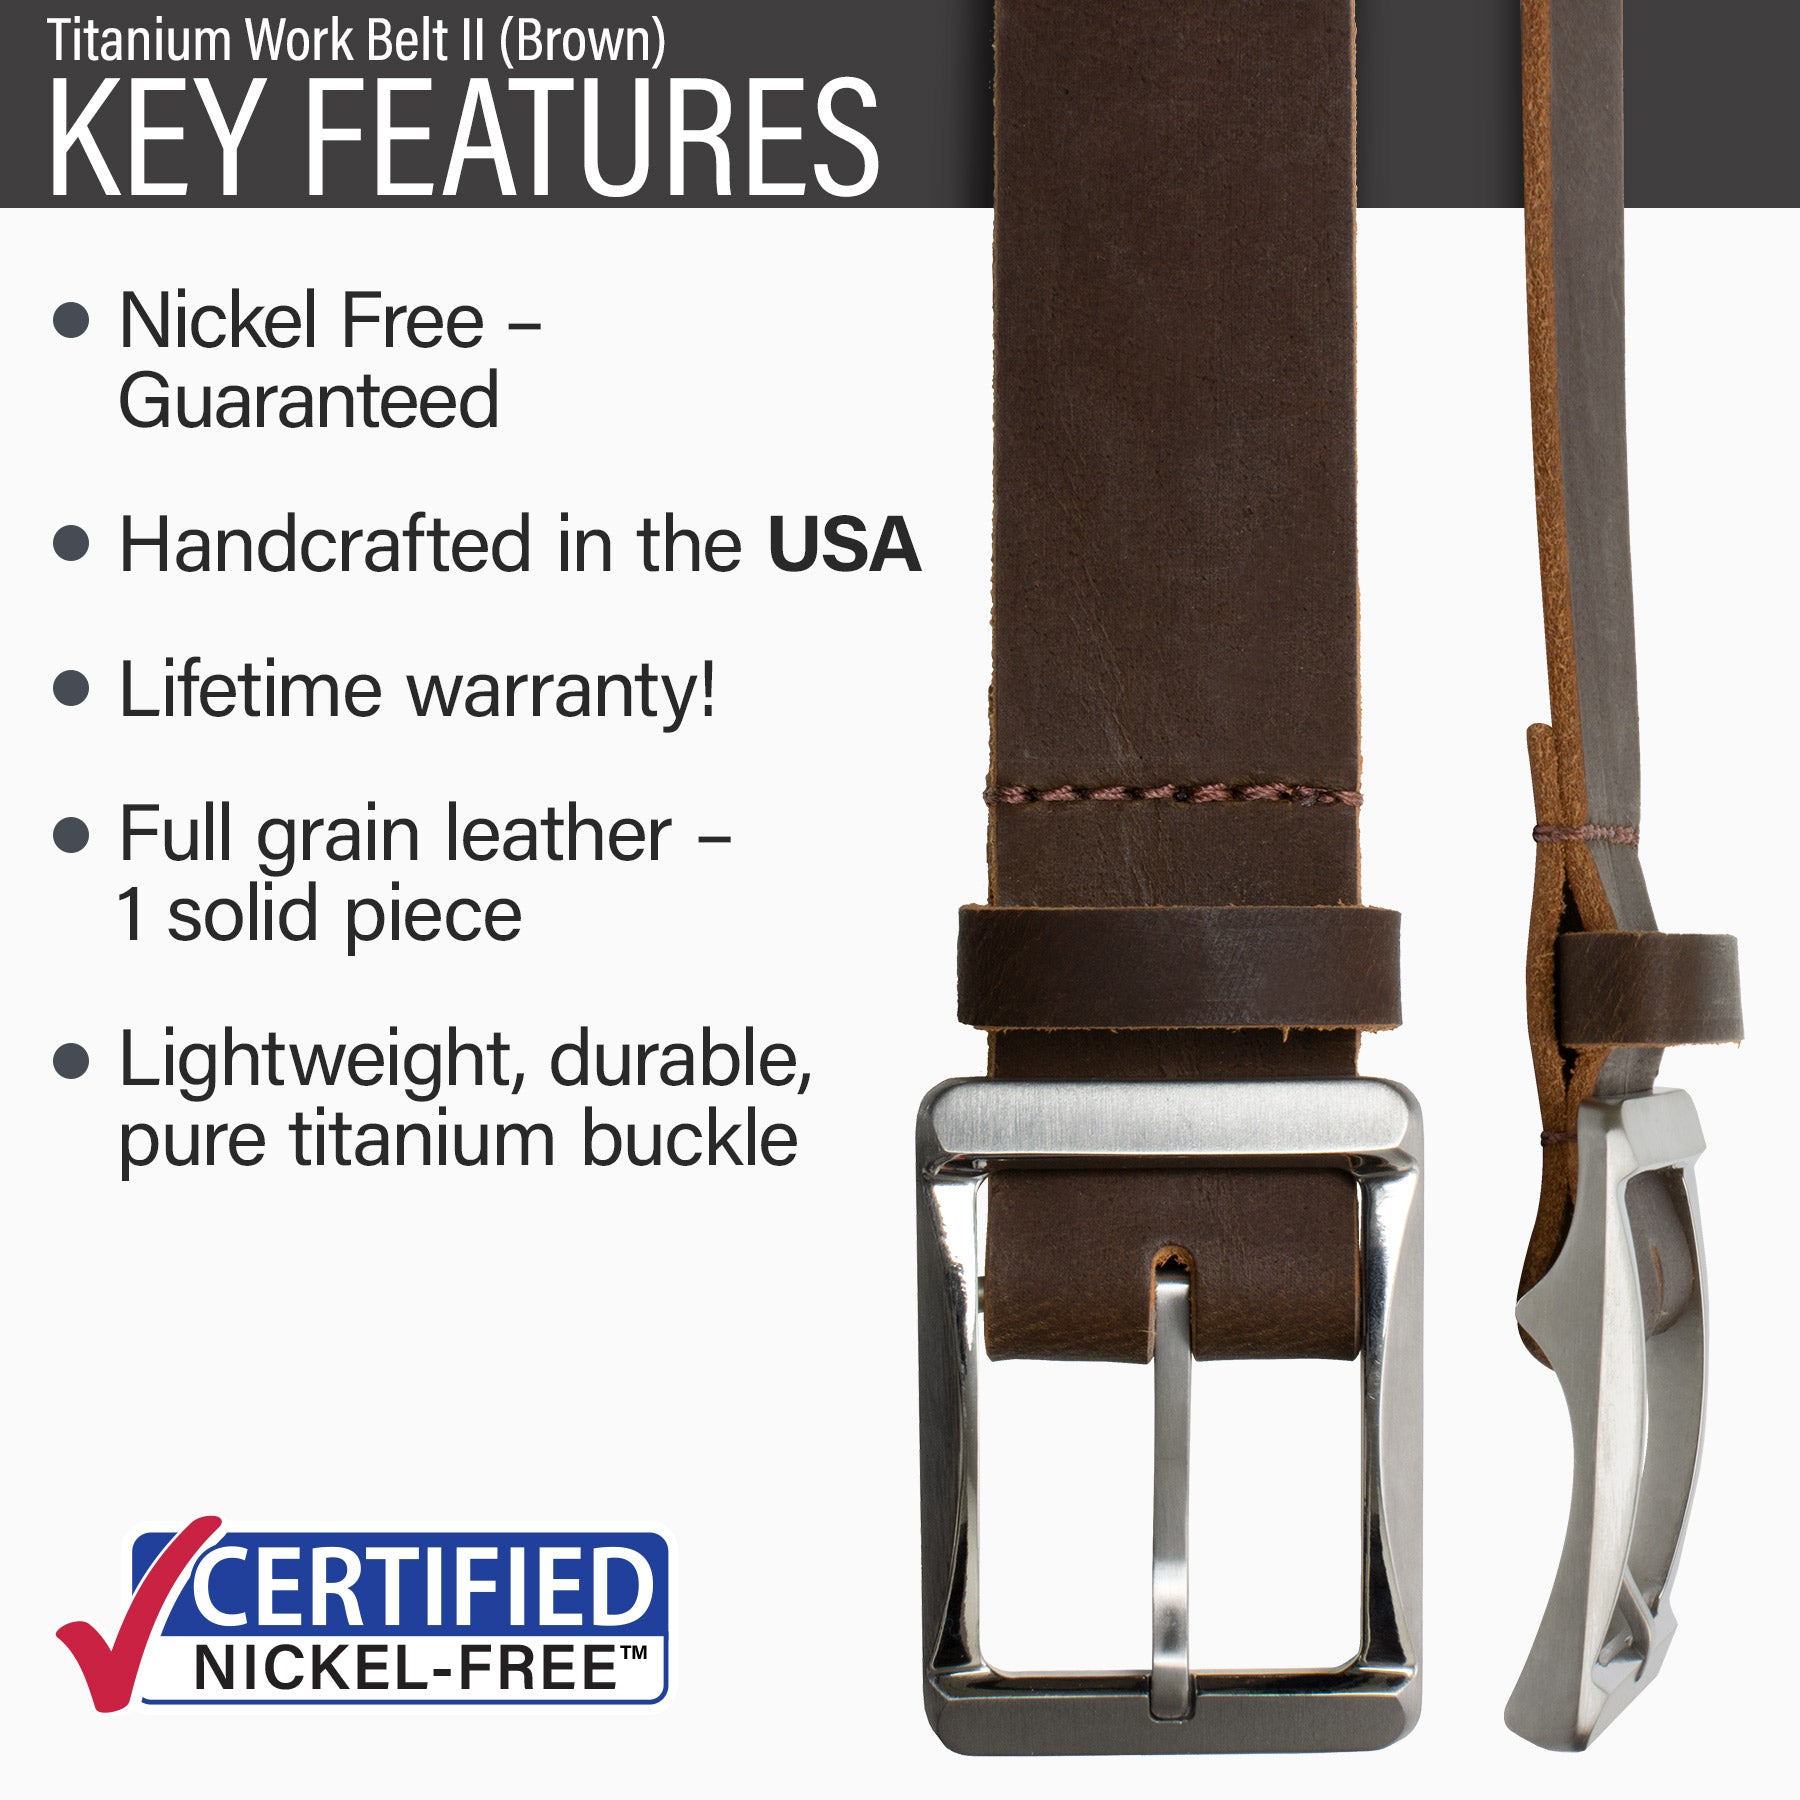 Distressed Leather | Genuine Leather Belt | Titanium Buckle | USA Made 38 inch / Distressed Brown / Titanium/Leather